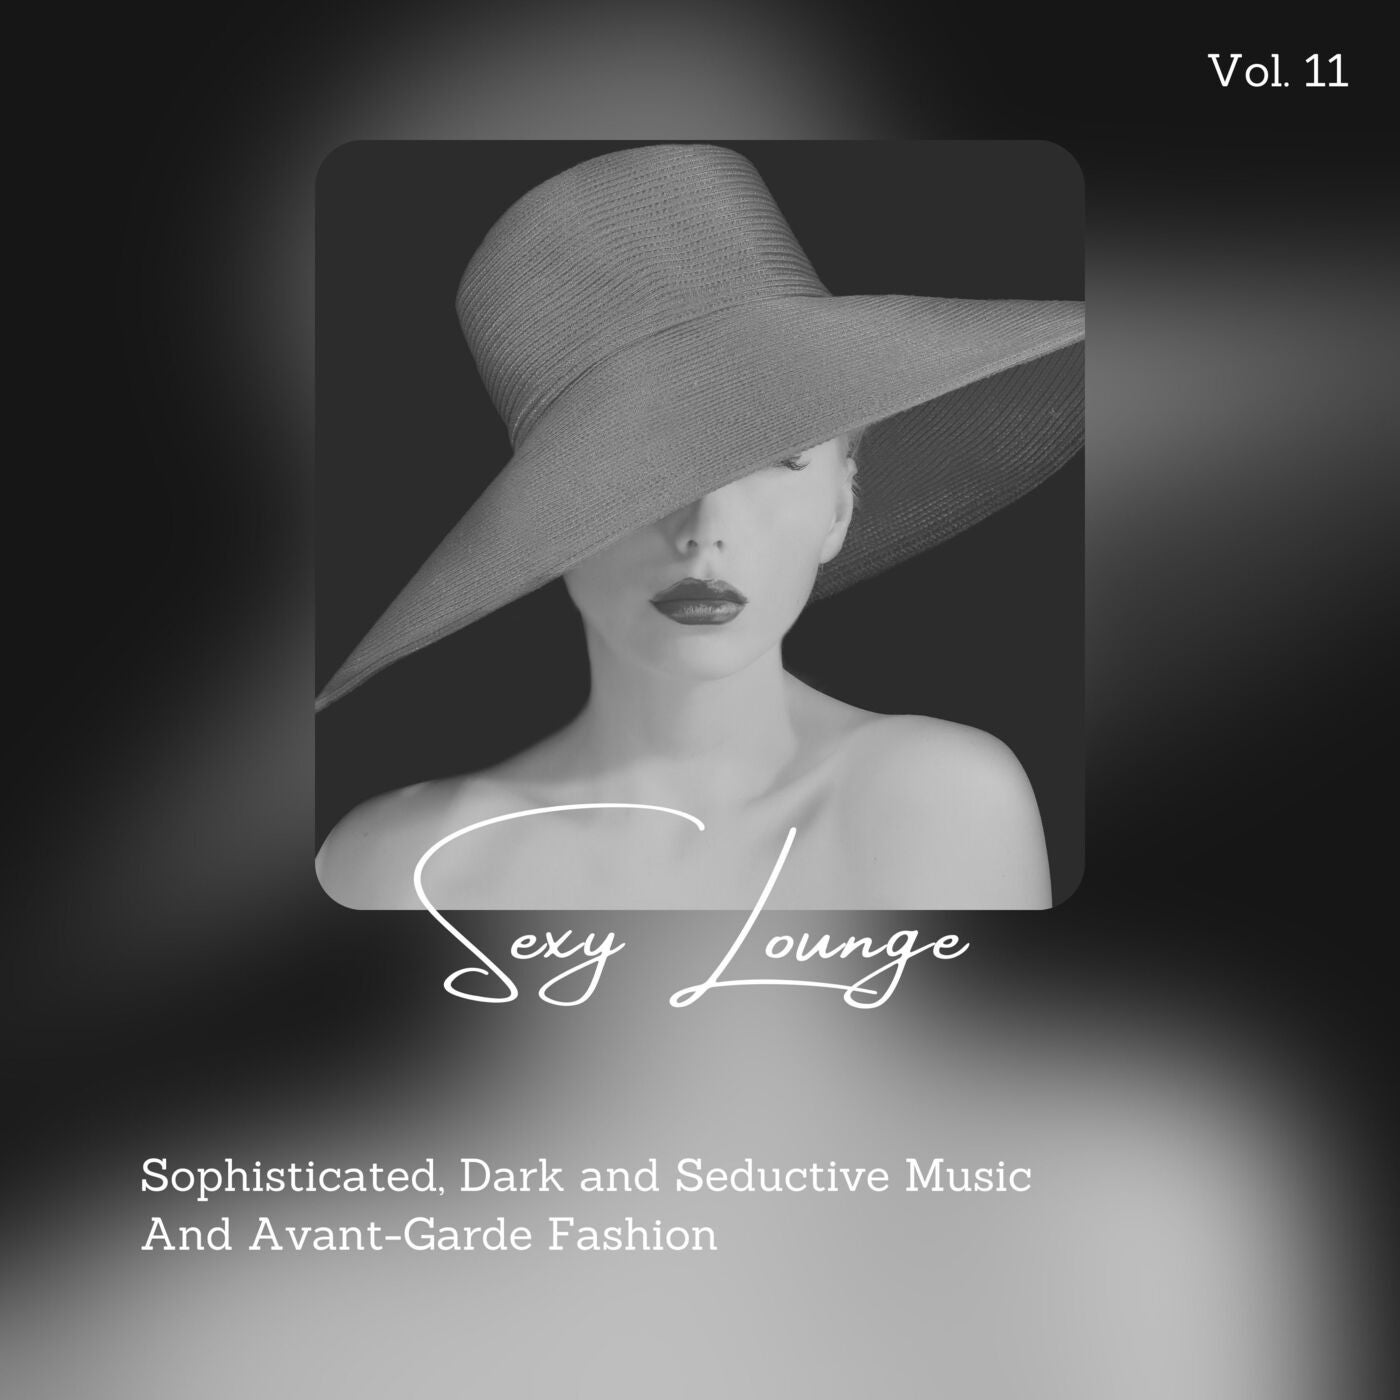 Sexy Lounge - Sophisticated, Dark And Seductive Music And Avant-Garde Fashion, Vol. 11